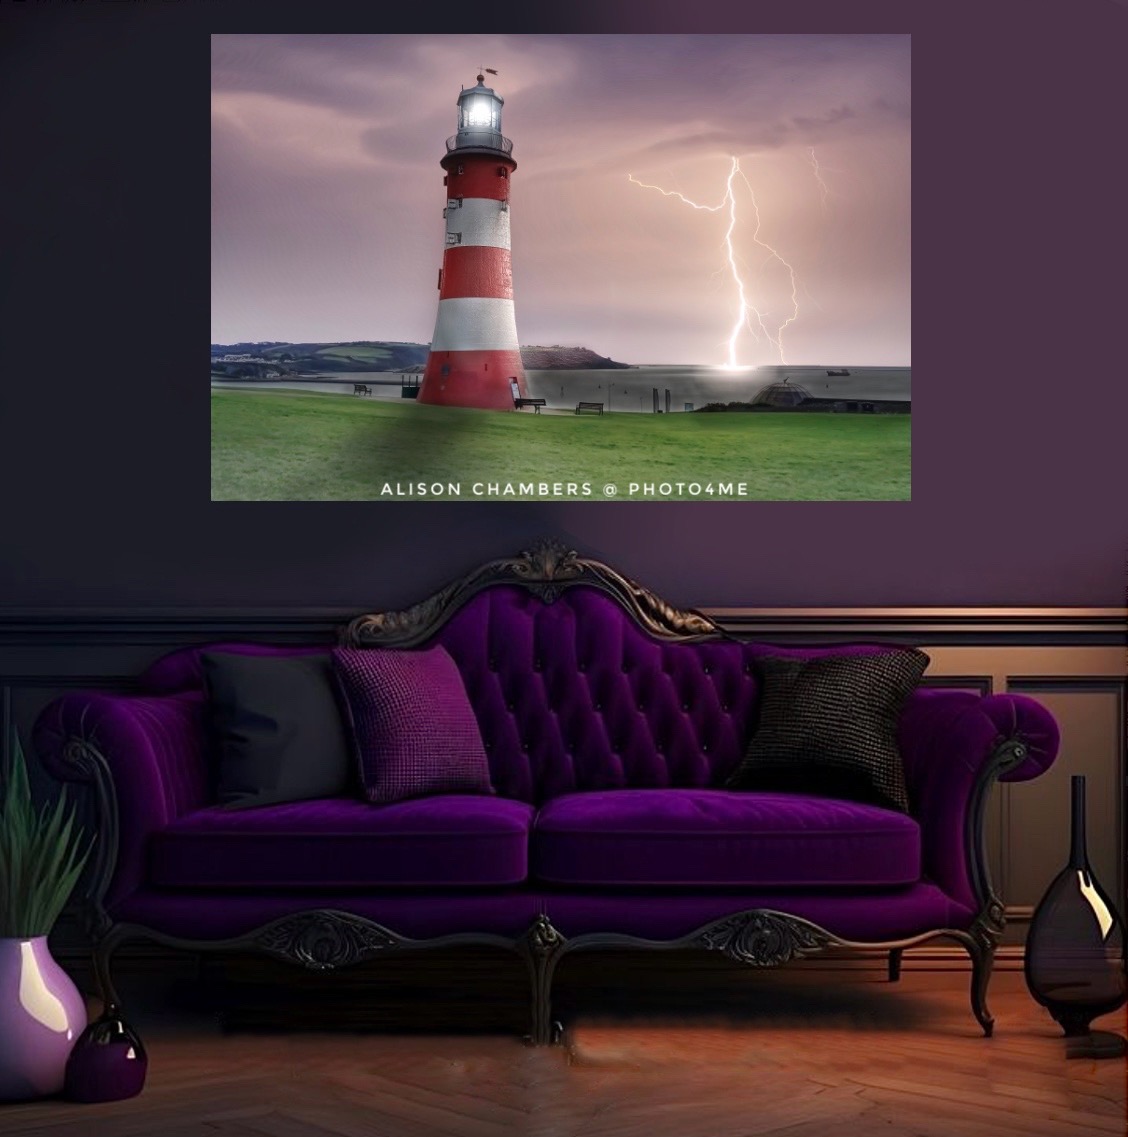 Plymouth Hoe Lightning©️. Available from; shop.photo4me.com/1321335 & alisonchambers2.redbubble.com & 2-alison-chambers.pixels.com #smeatonstower #plymouthhoe #plymouthuk #plymouth #plymouthsound #lighthouse #lightning #wallartforsale #devoncoast #photo4me